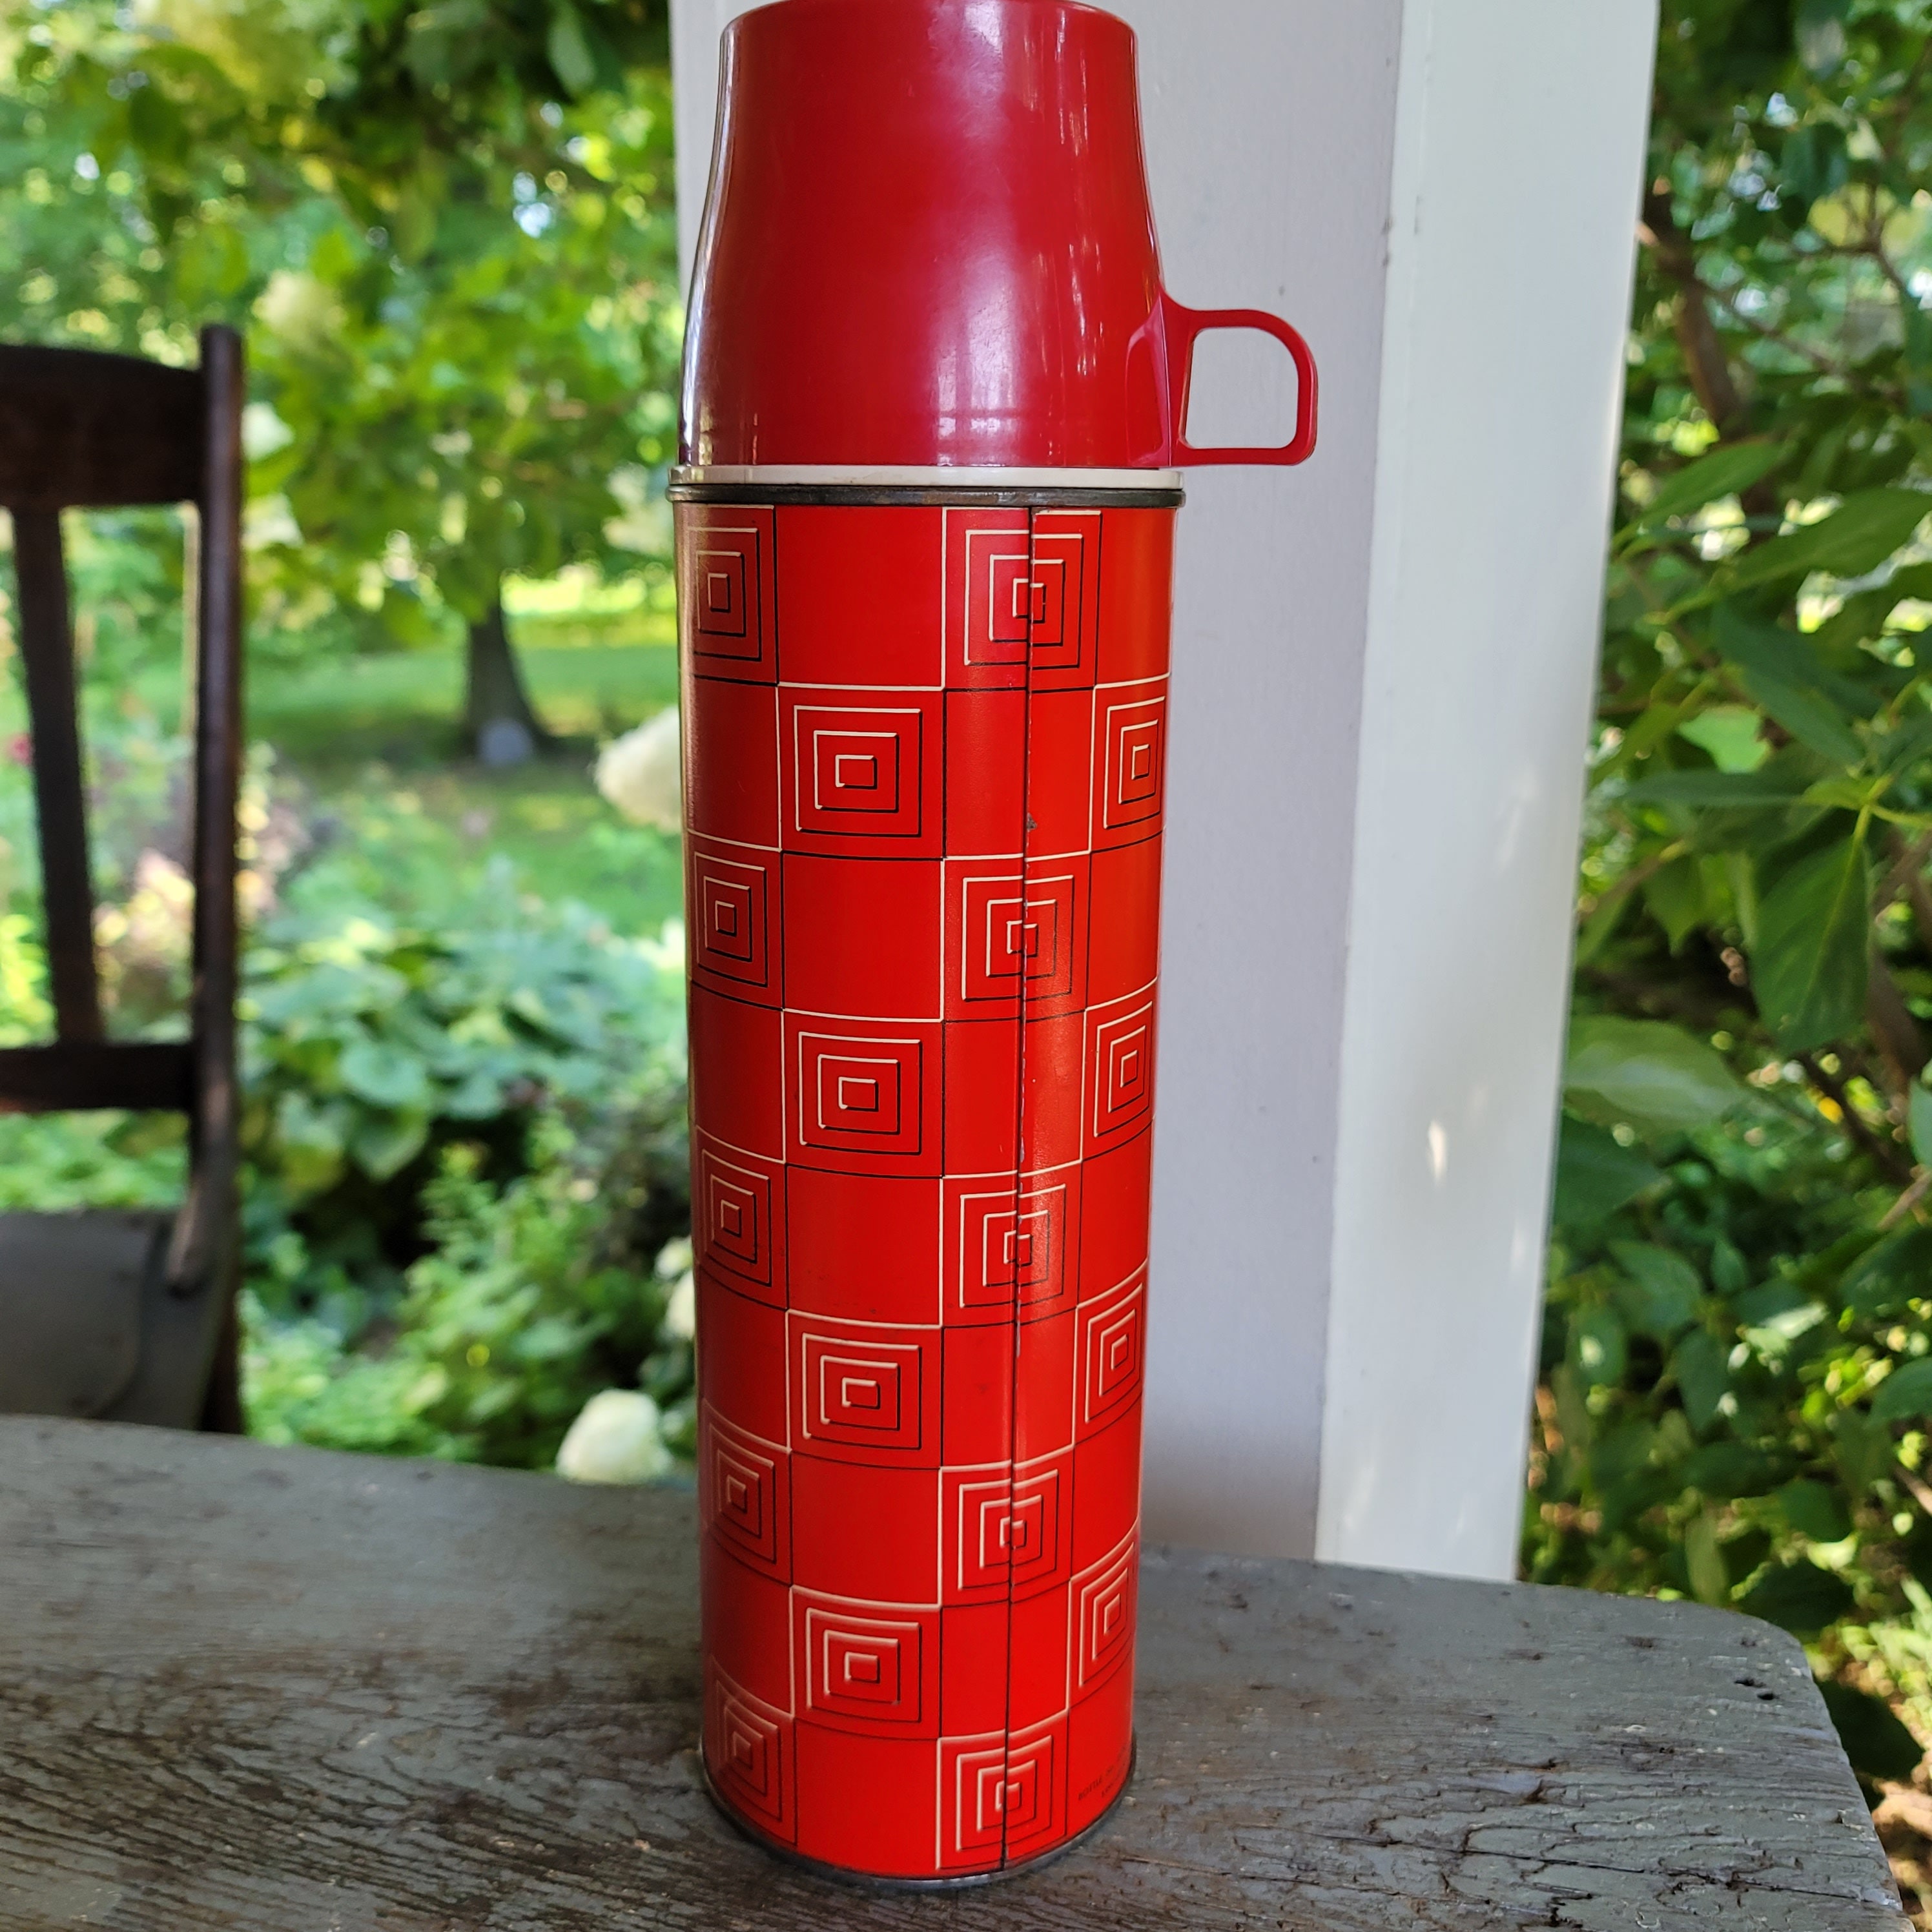 Vintage Icy Hot Red and Grey Thermos, Made by the American Thermos